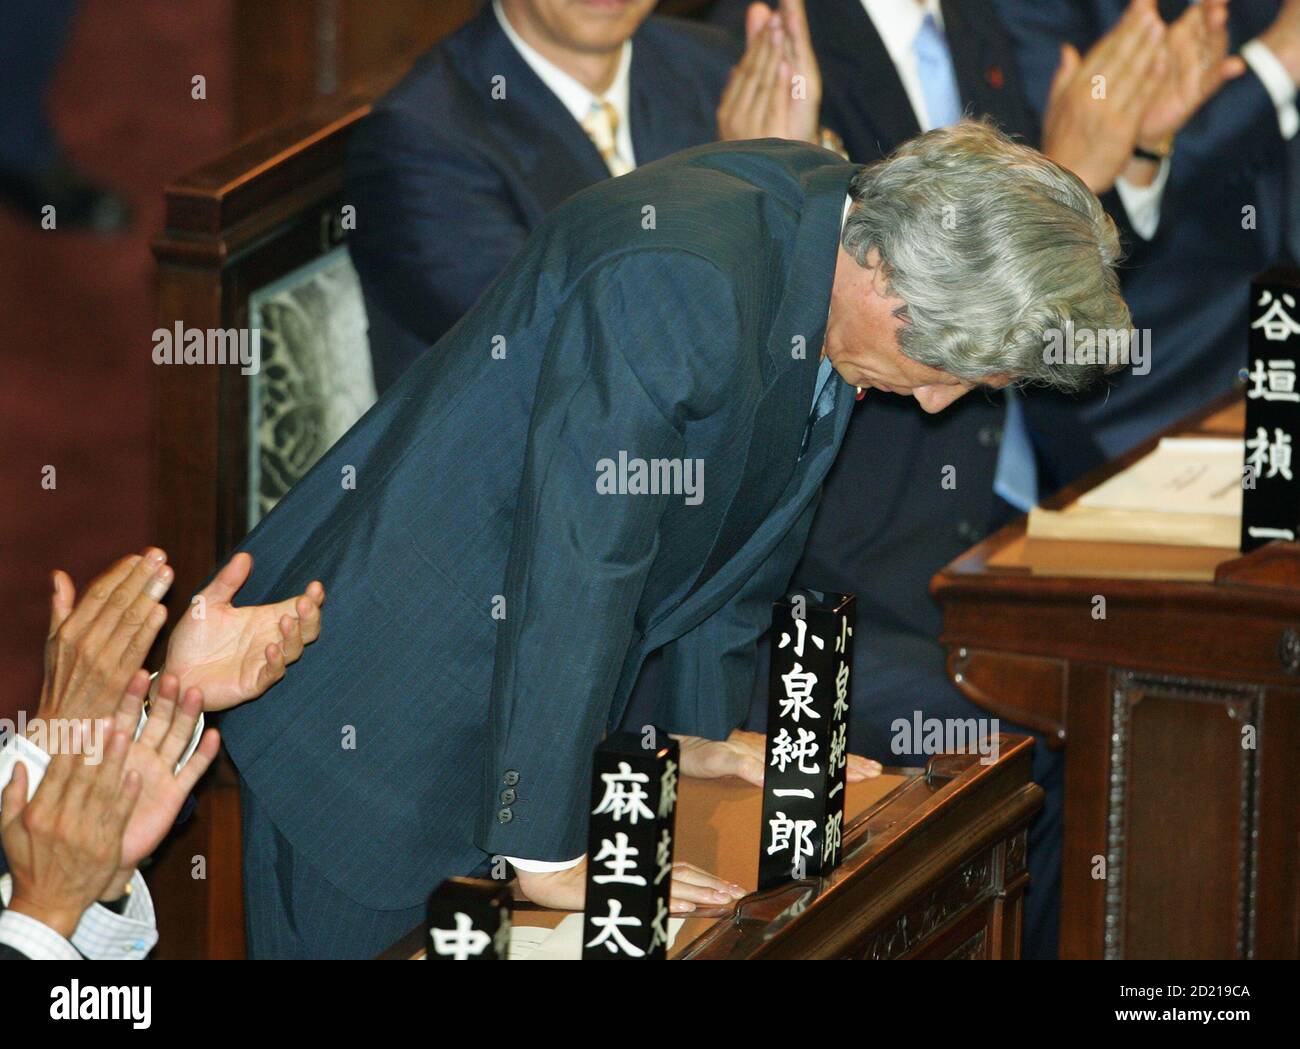 Japanese Prime Minister Junichiro Koizumi bows as he is applauded by fellow parliamentarians upon being re-elected prime minister at a special session of parliament in Tokyo September 21, 2005. The confirmation of the re-appointment cleared the way for Koizumi to press on with a reform programme including privatisation of the postal system after his party's landslide election victory this month. REUTERS/Issei Kato  ES/mk Stock Photo